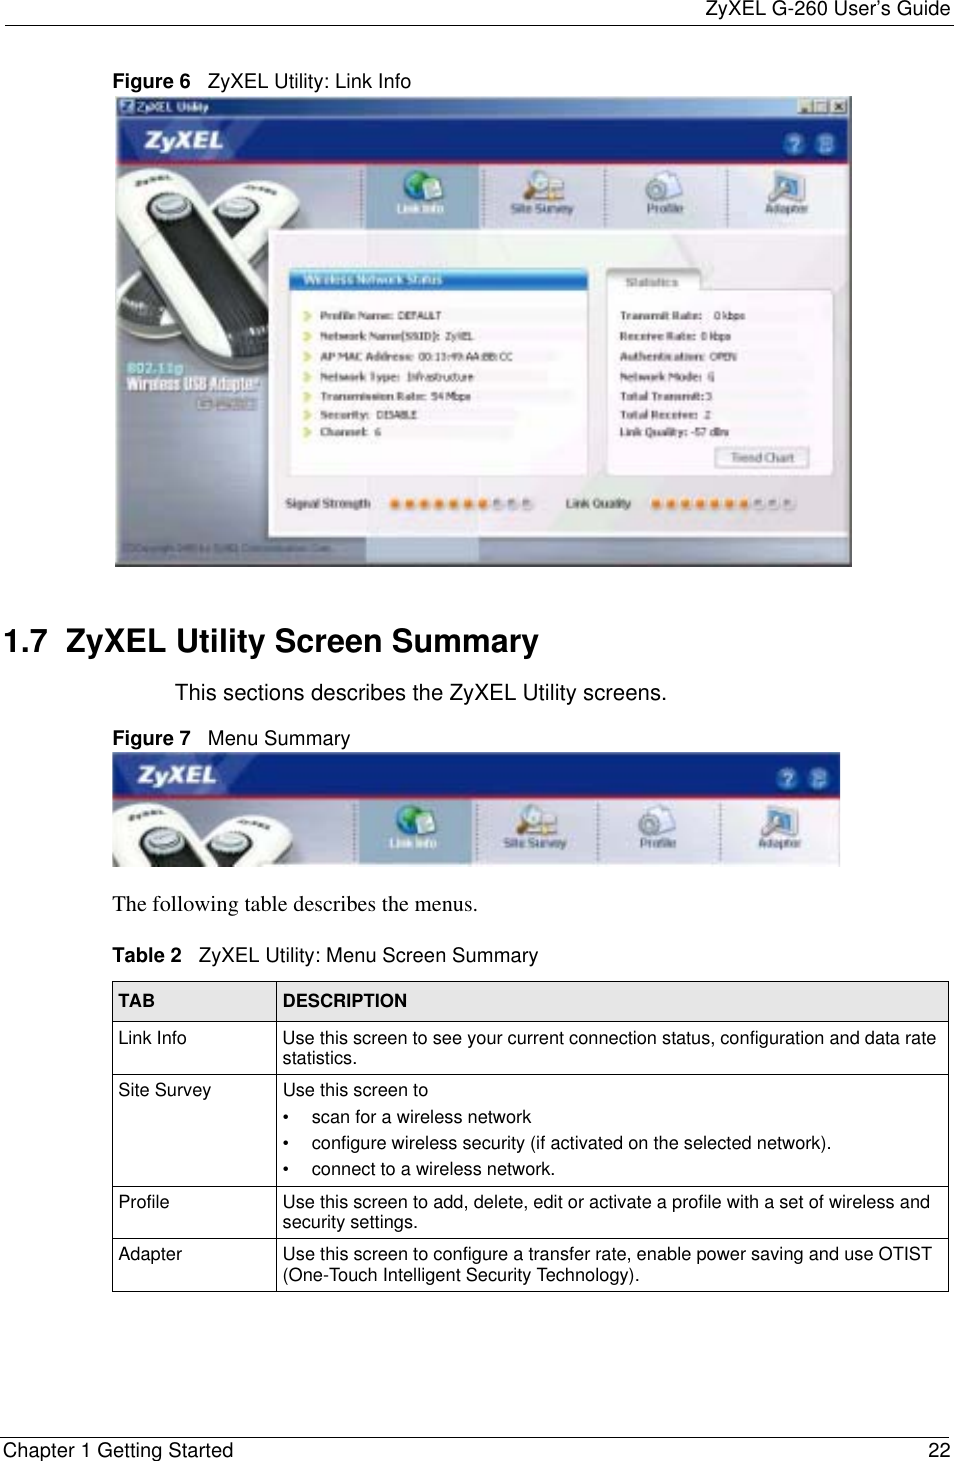 ZyXEL G-260 User’s GuideChapter 1 Getting Started 22Figure 6   ZyXEL Utility: Link Info 1.7  ZyXEL Utility Screen Summary This sections describes the ZyXEL Utility screens. Figure 7   Menu Summary The following table describes the menus. Table 2   ZyXEL Utility: Menu Screen SummaryTAB DESCRIPTIONLink Info Use this screen to see your current connection status, configuration and data rate statistics.Site Survey Use this screen to • scan for a wireless network• configure wireless security (if activated on the selected network).• connect to a wireless network.Profile Use this screen to add, delete, edit or activate a profile with a set of wireless and security settings.Adapter Use this screen to configure a transfer rate, enable power saving and use OTIST (One-Touch Intelligent Security Technology).